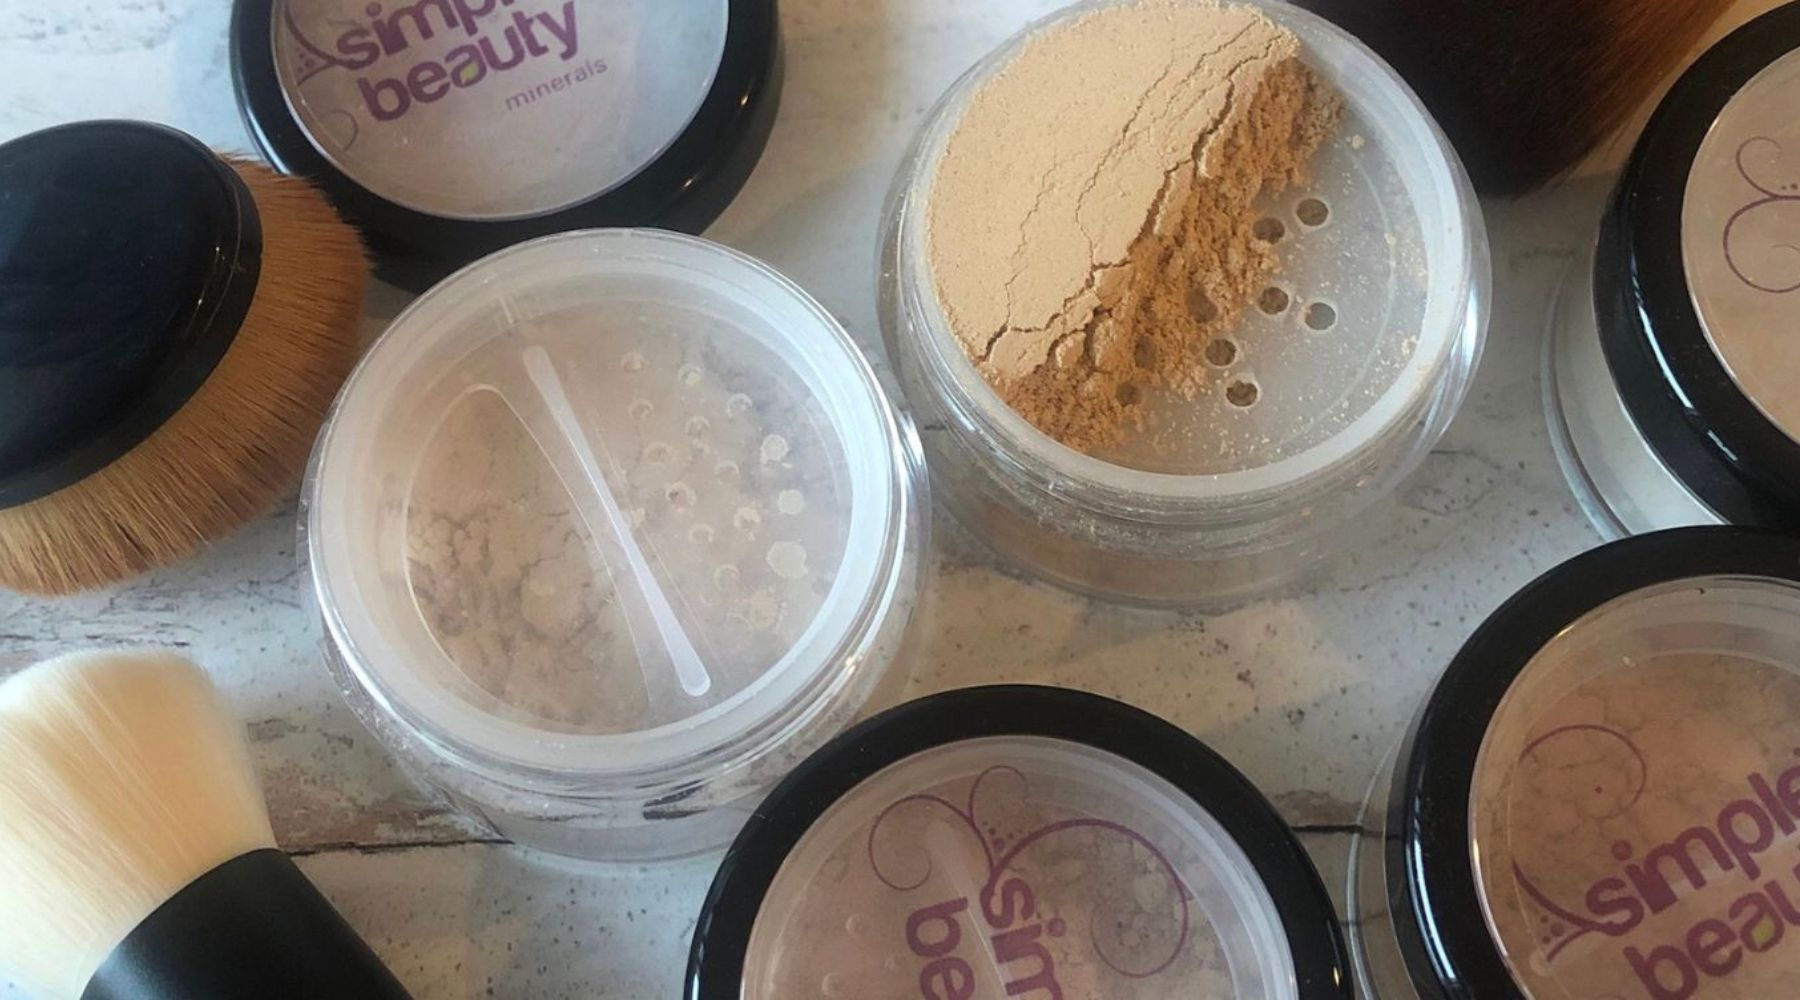 pots of open and closed mineral foundation.